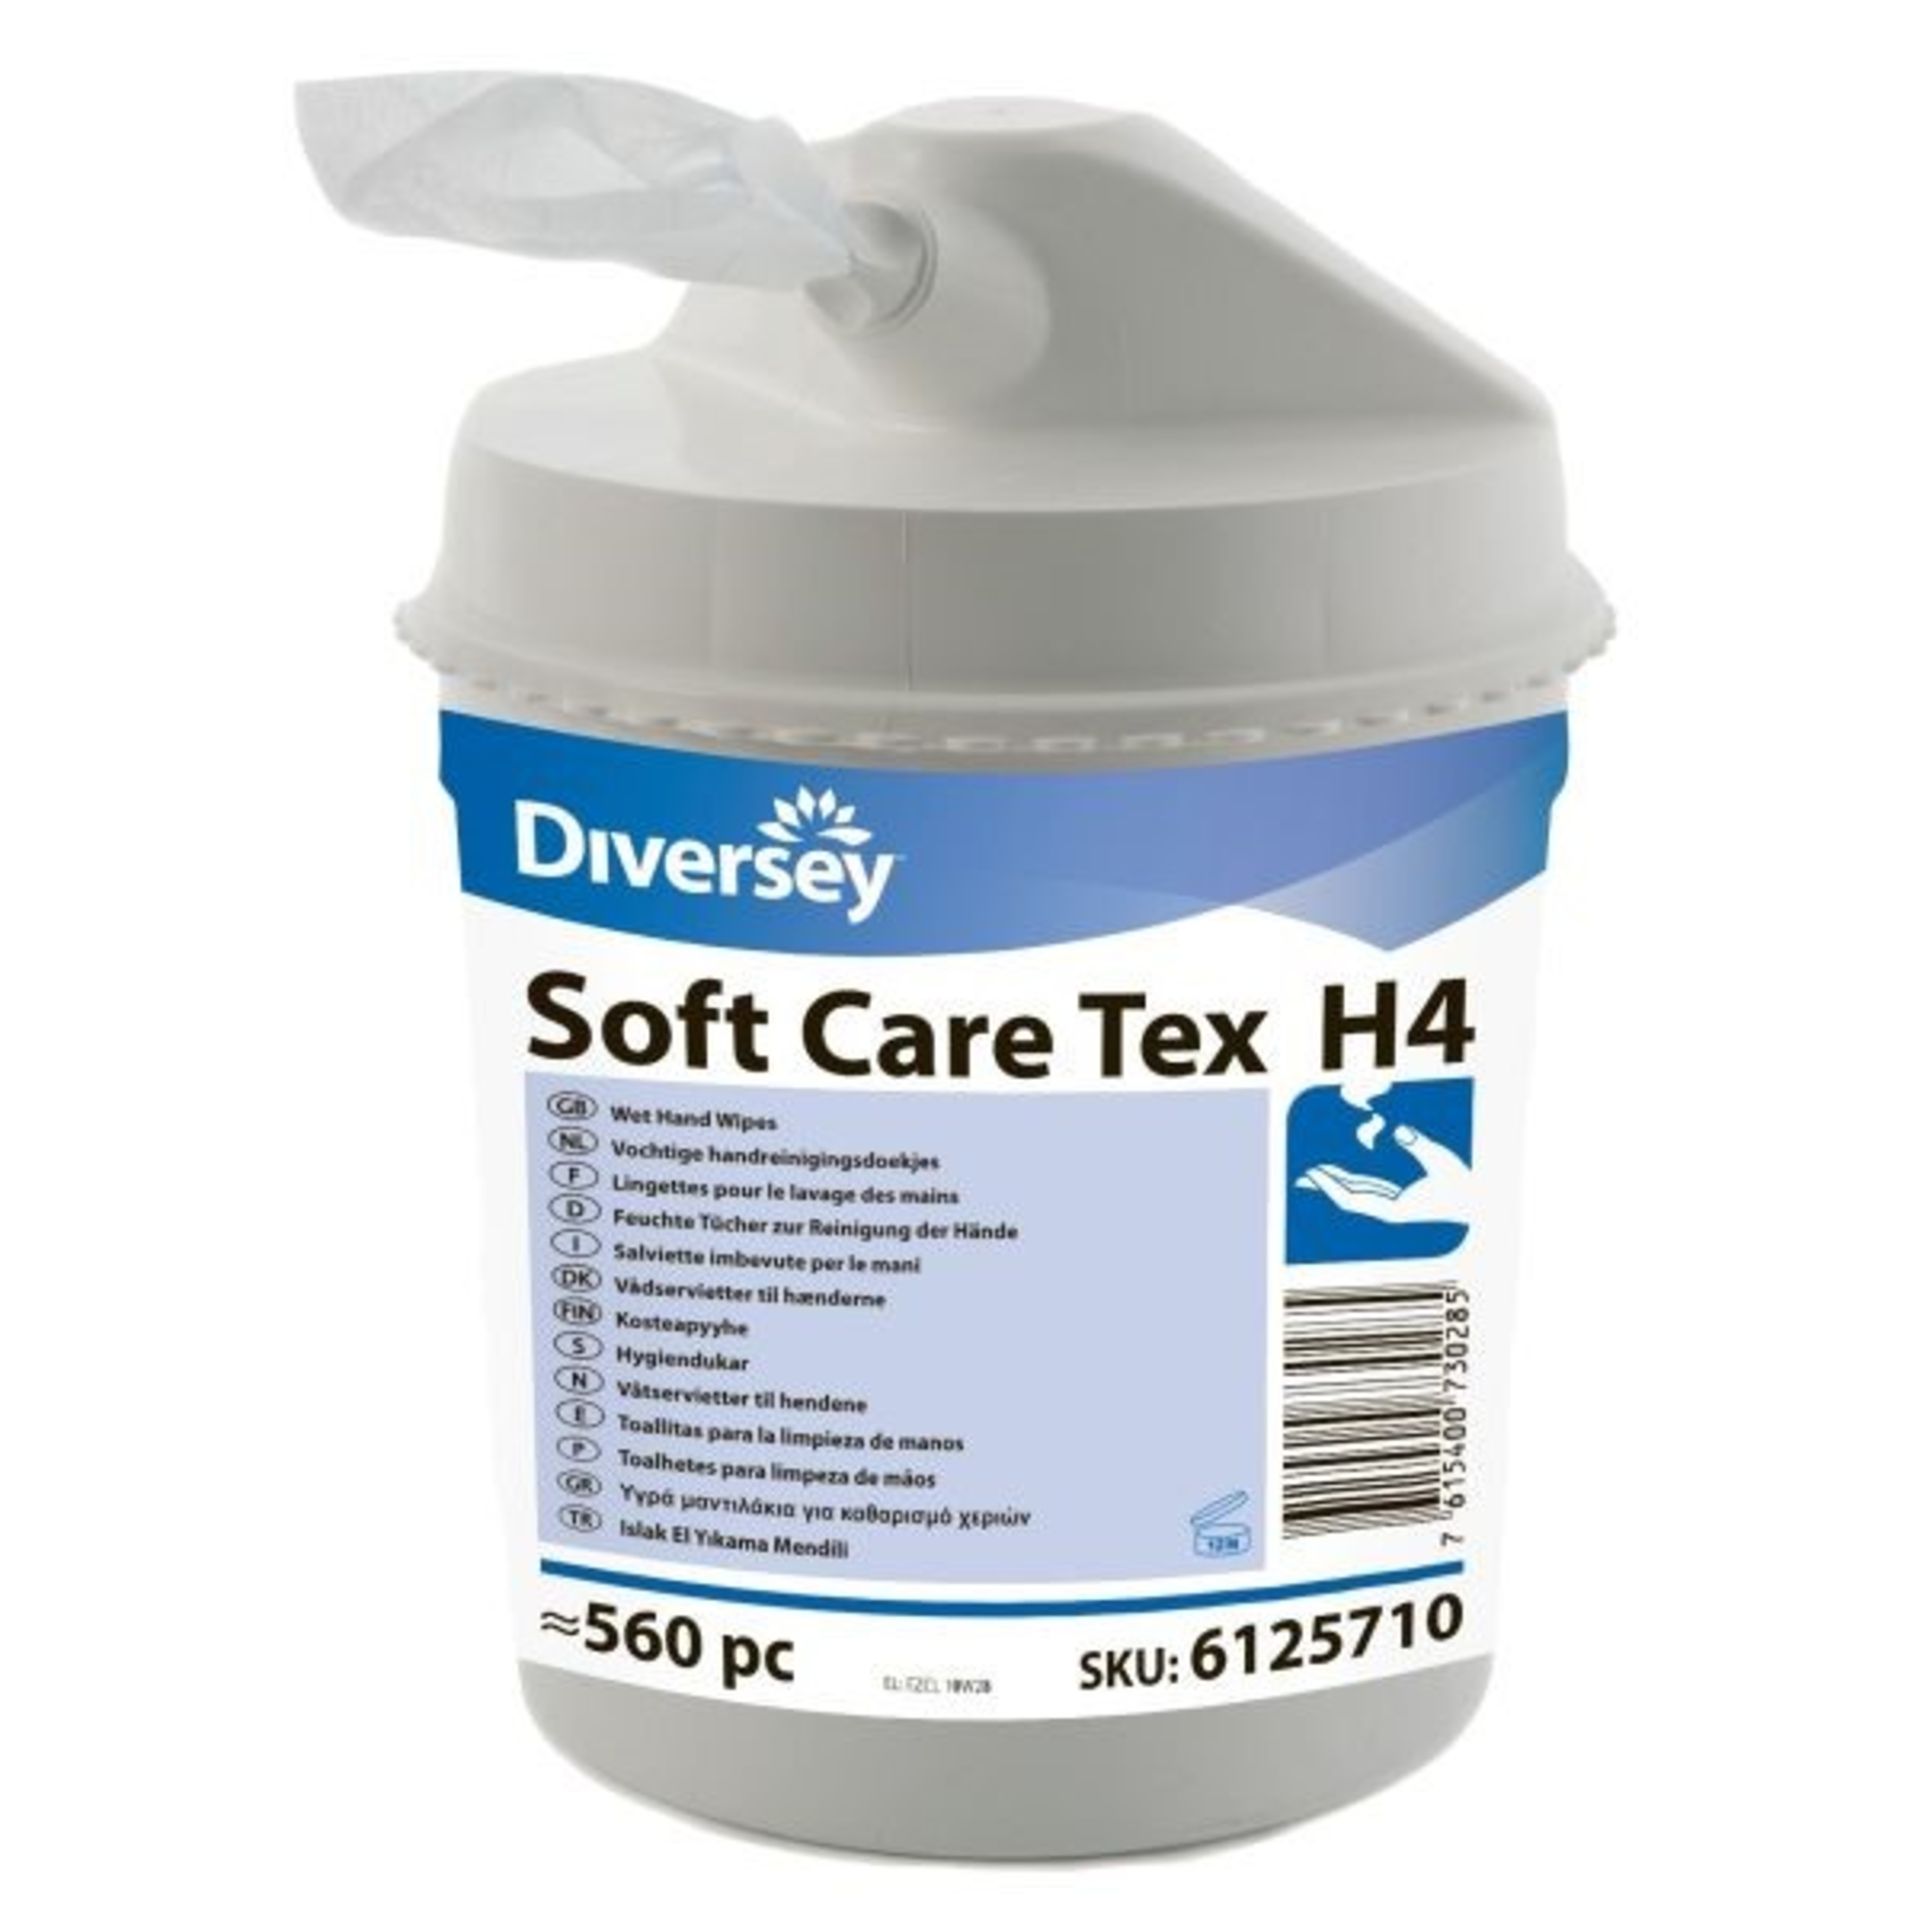 1 AS NEW DIVERSEY SOFT CARE TEX H4 WET HAND WIPES